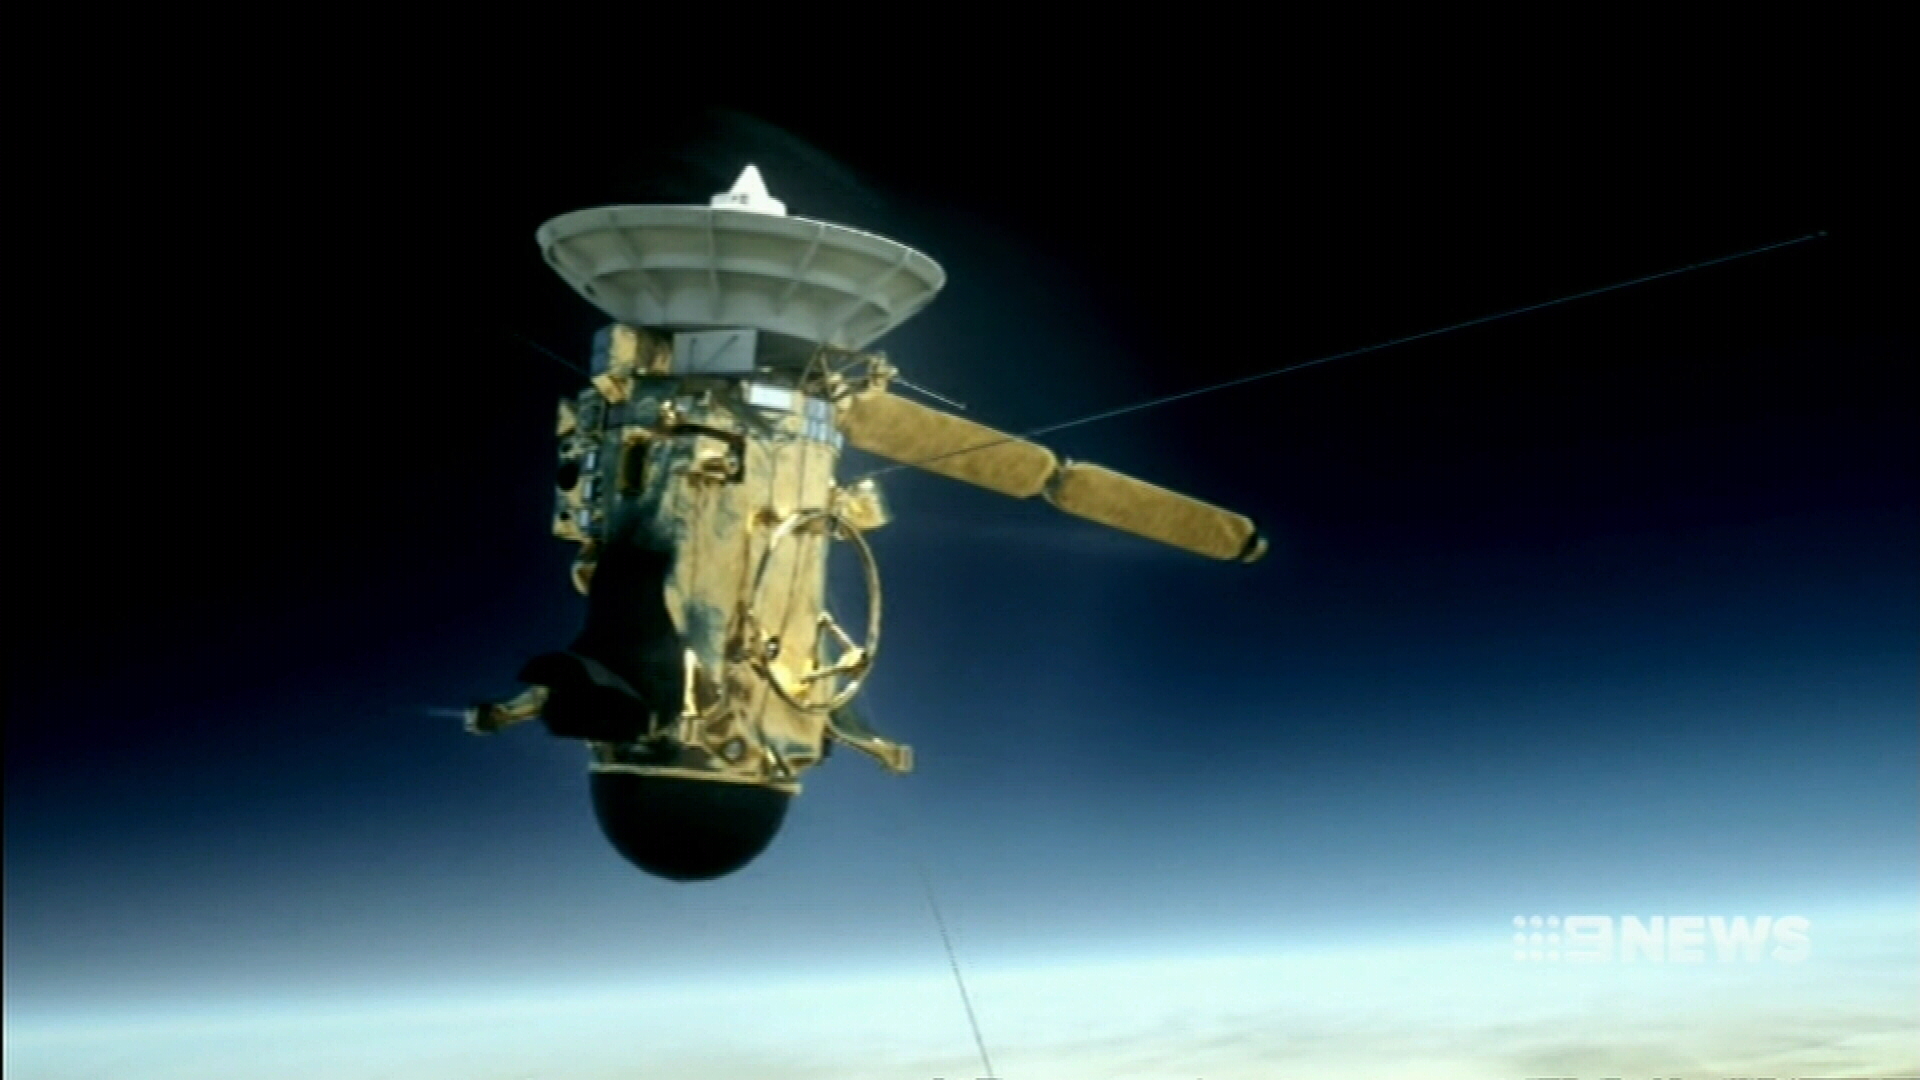 The Cassini spacecraft has one final, fiery mission. (9NEWS)